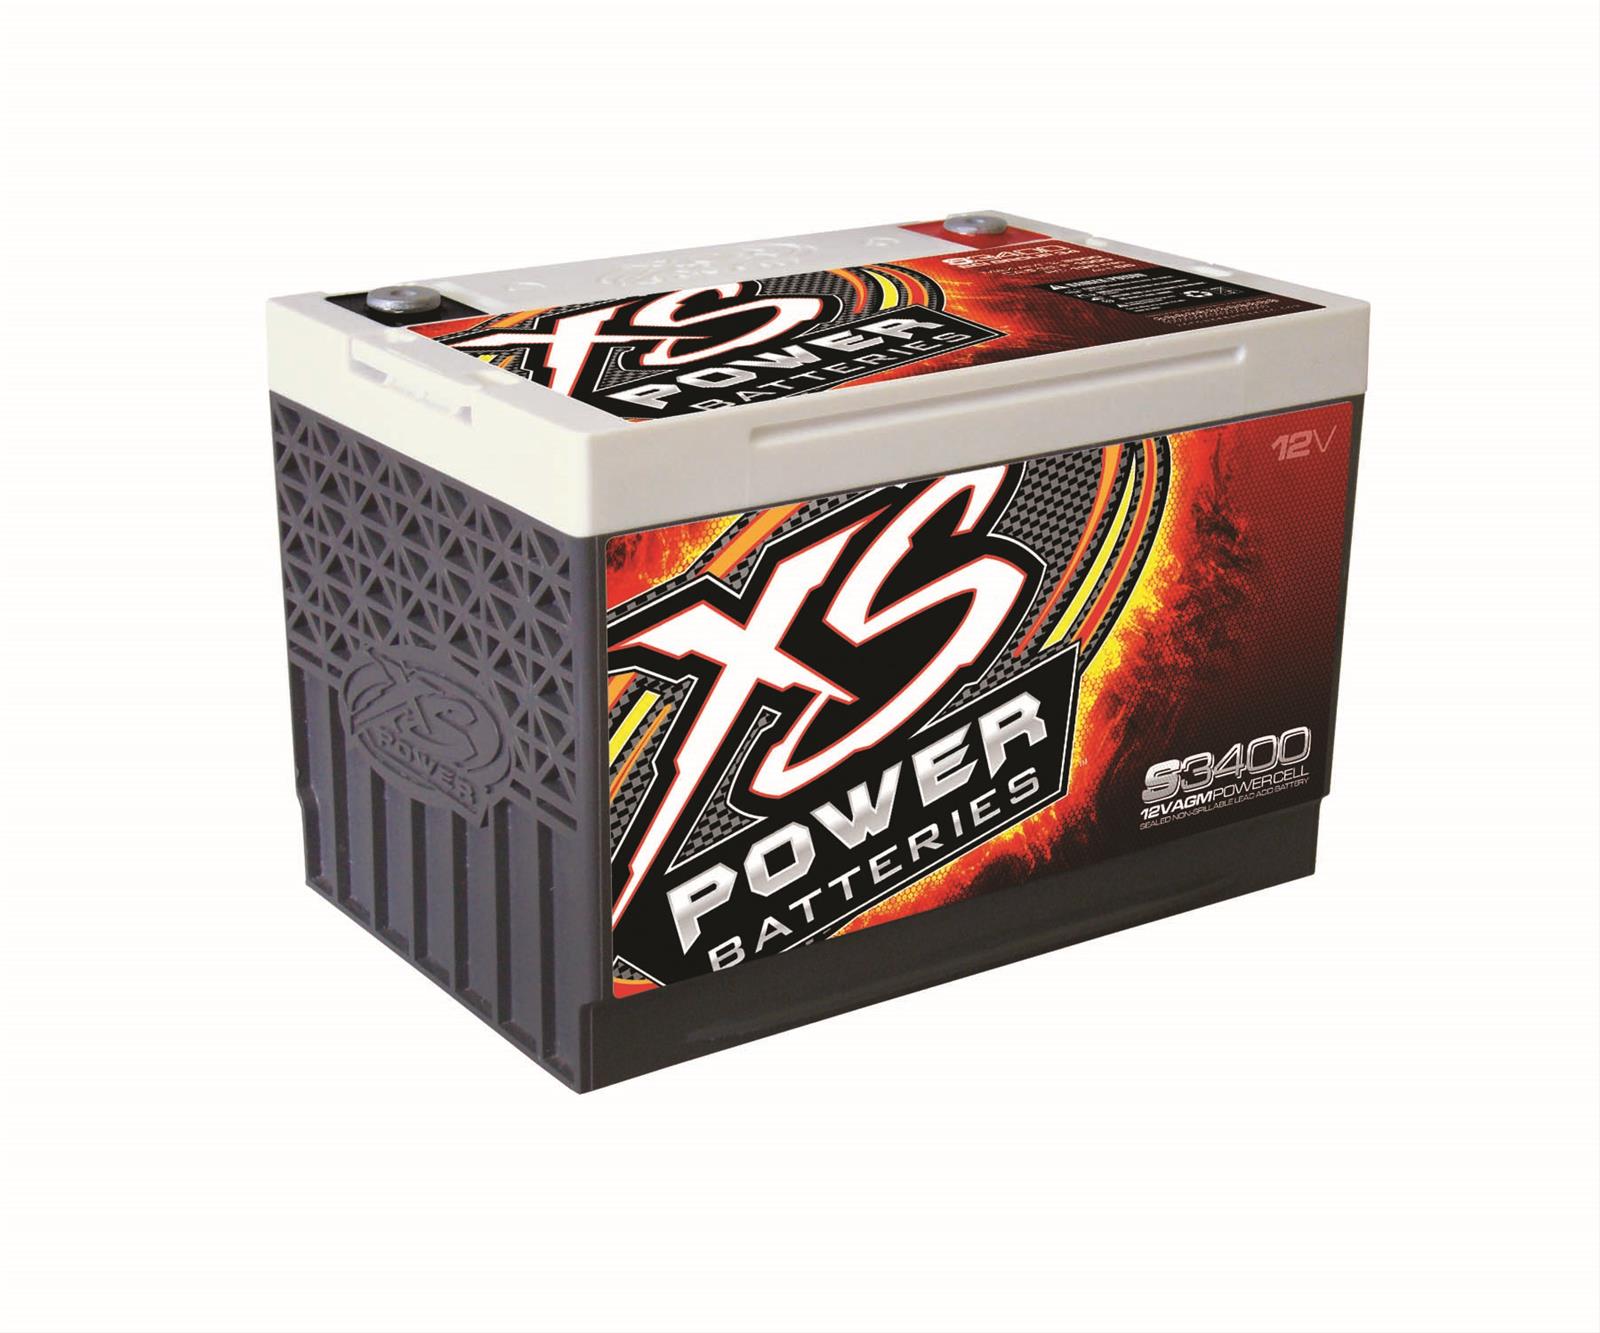 Details about XS Power AGM Battery S3400